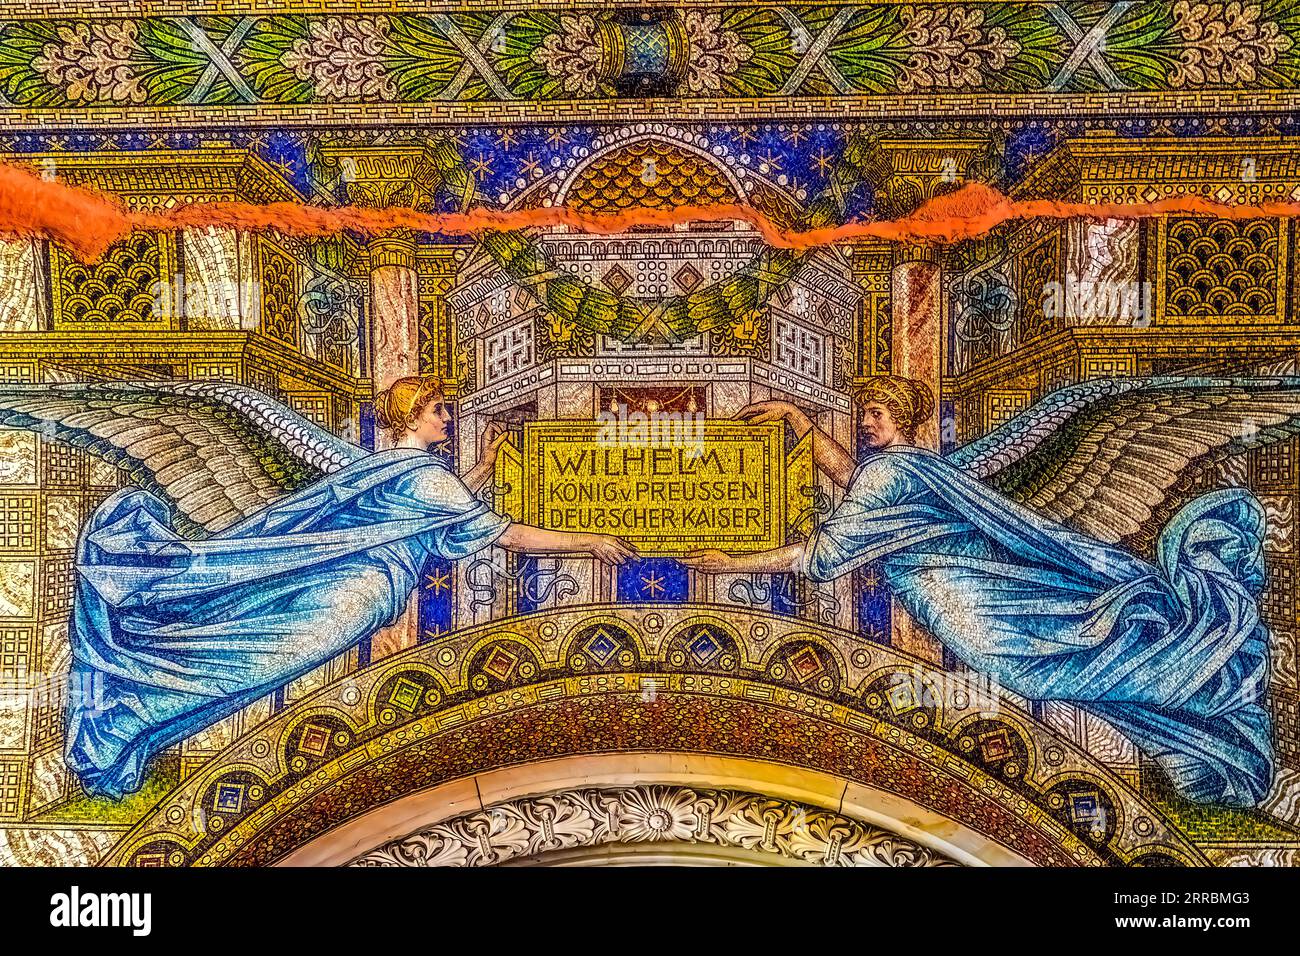 Angels Mosaic Kaiser Wilhelm Memorial Church Gedächtniskirche Berlin Germany. Mosaic and Church built in 1890s, bombed in 1943. Chruch and Mosaic rest Stock Photo